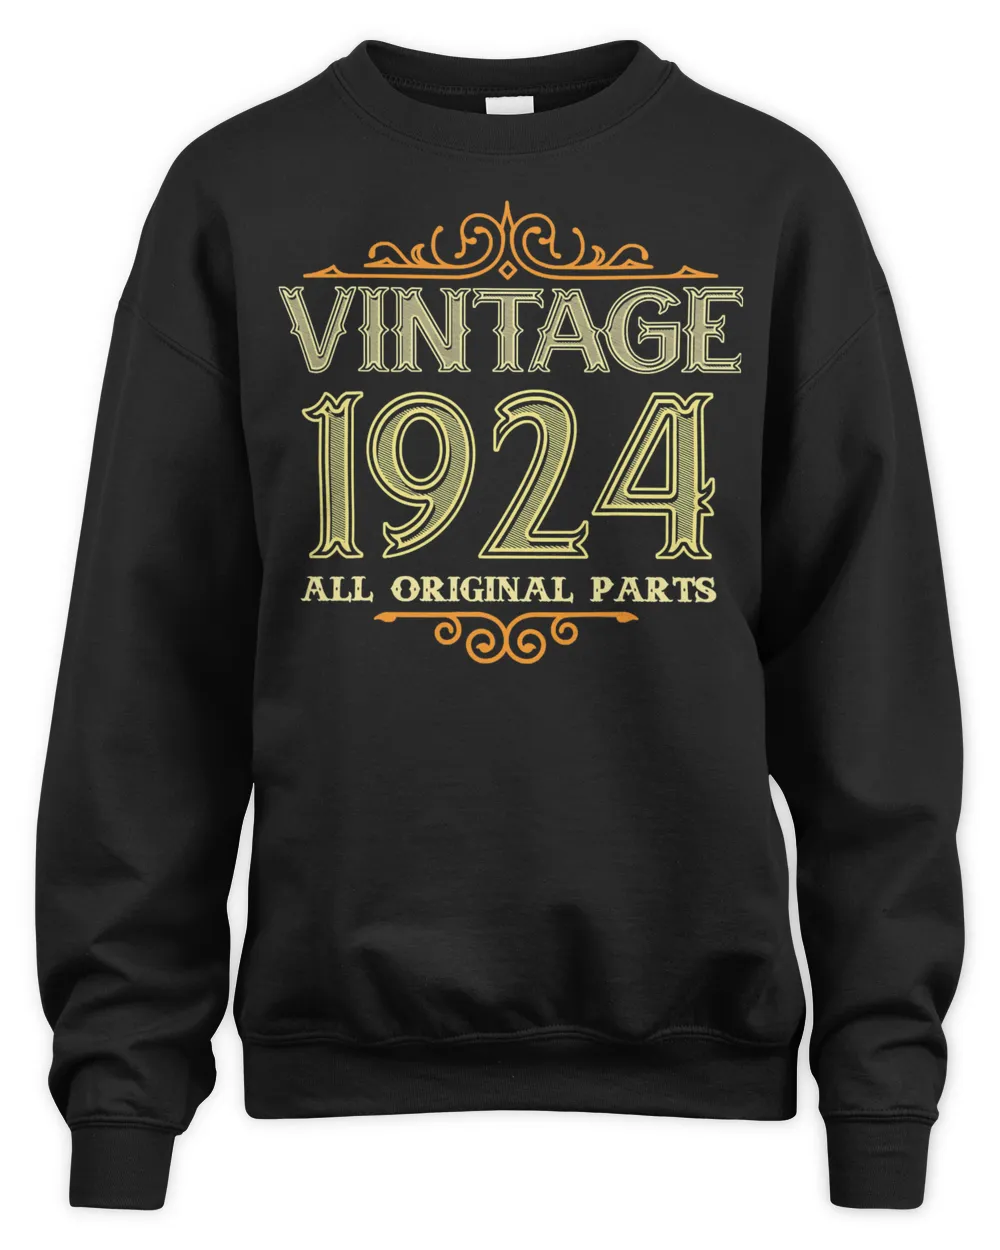 Vintage 1924 Funny 98 Years Old Girls Women 98th Birthday